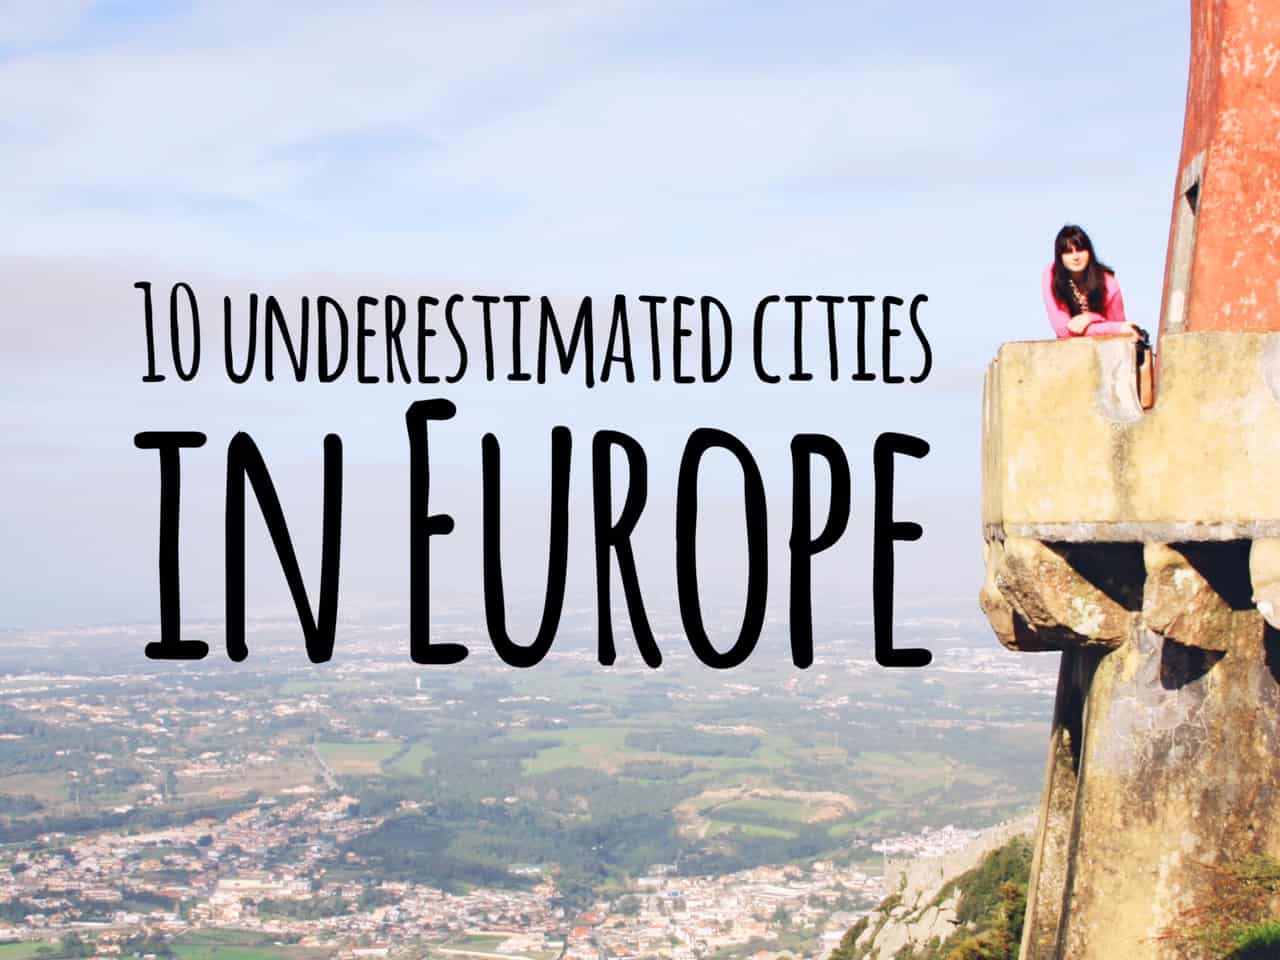 10+ AMAZING UNDERRATED CITIES IN EUROPE THAT YOU SHOULD ADD TO YOUR TRAVEL LIST